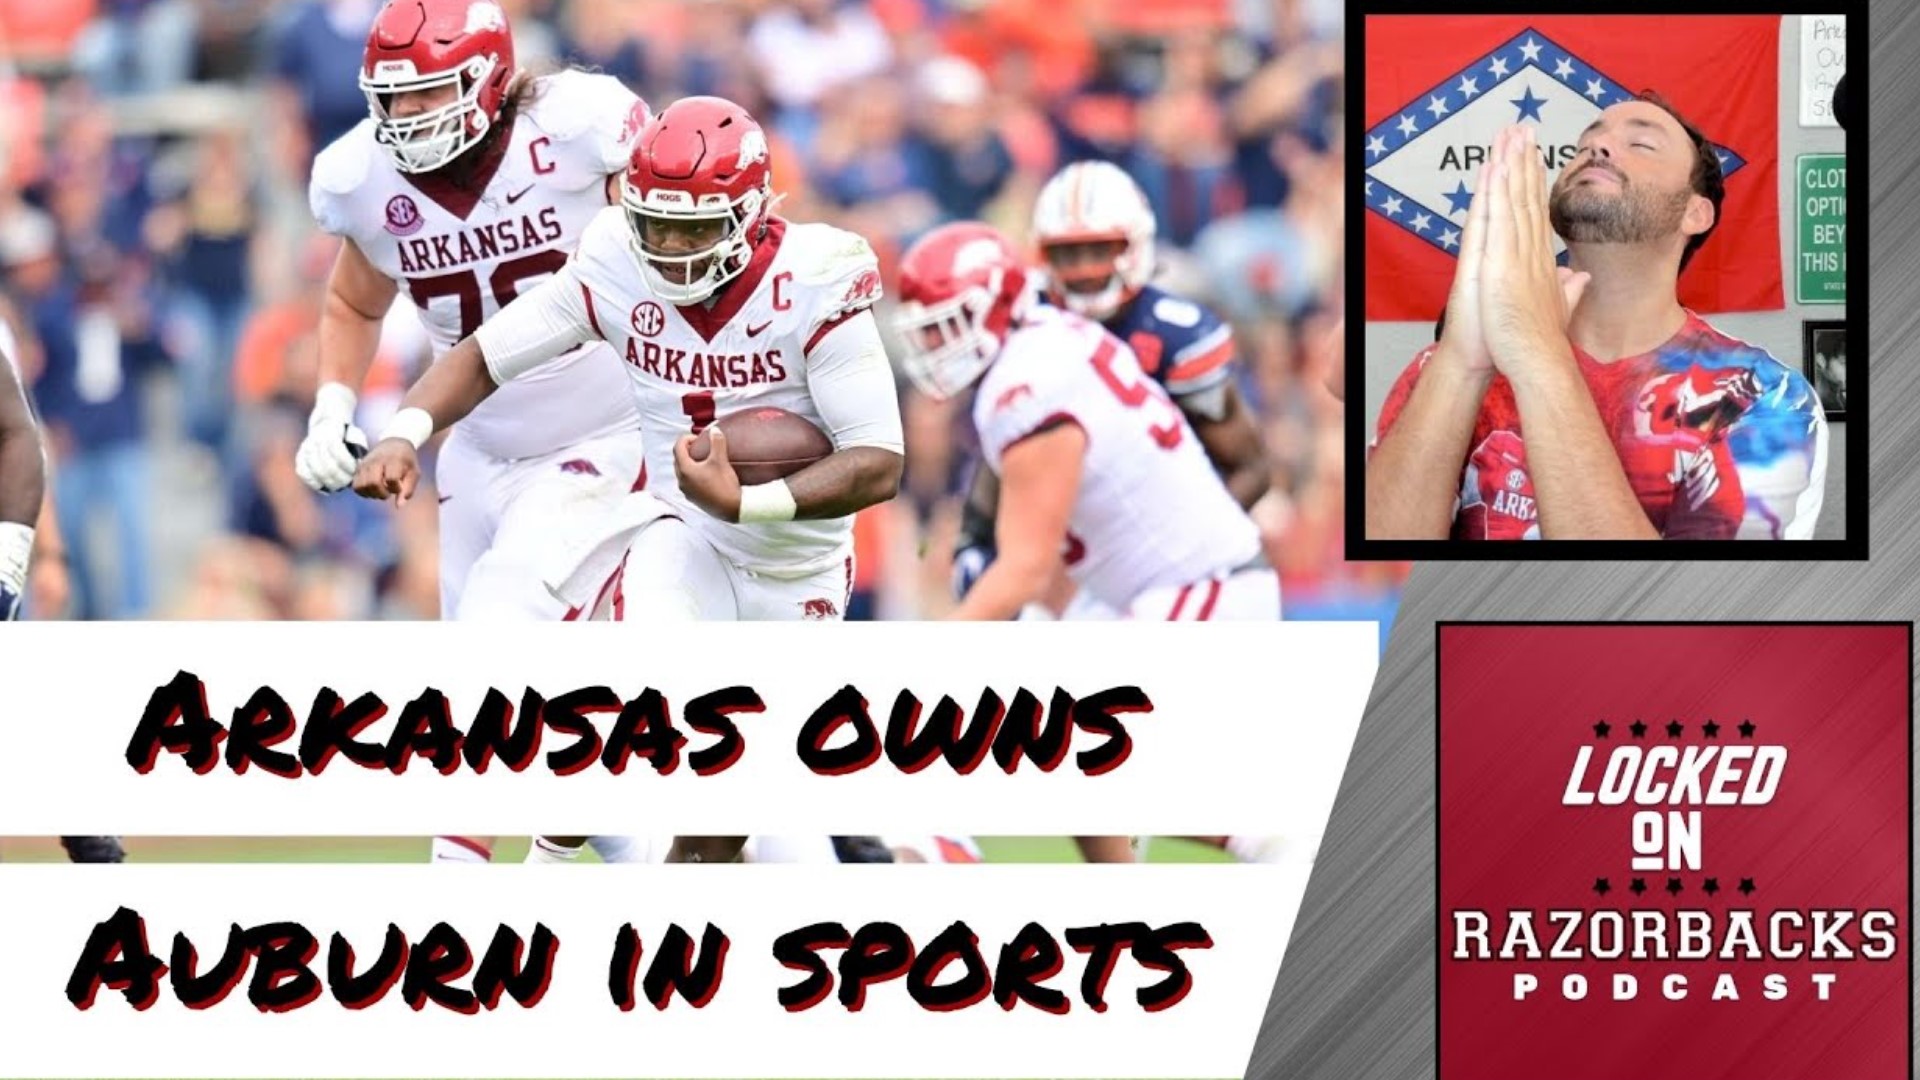 John Nabors reacts to the Razorback's performance as they go into Auburn and completely dismantle them and why Rocket Sanders is the best running back in the country